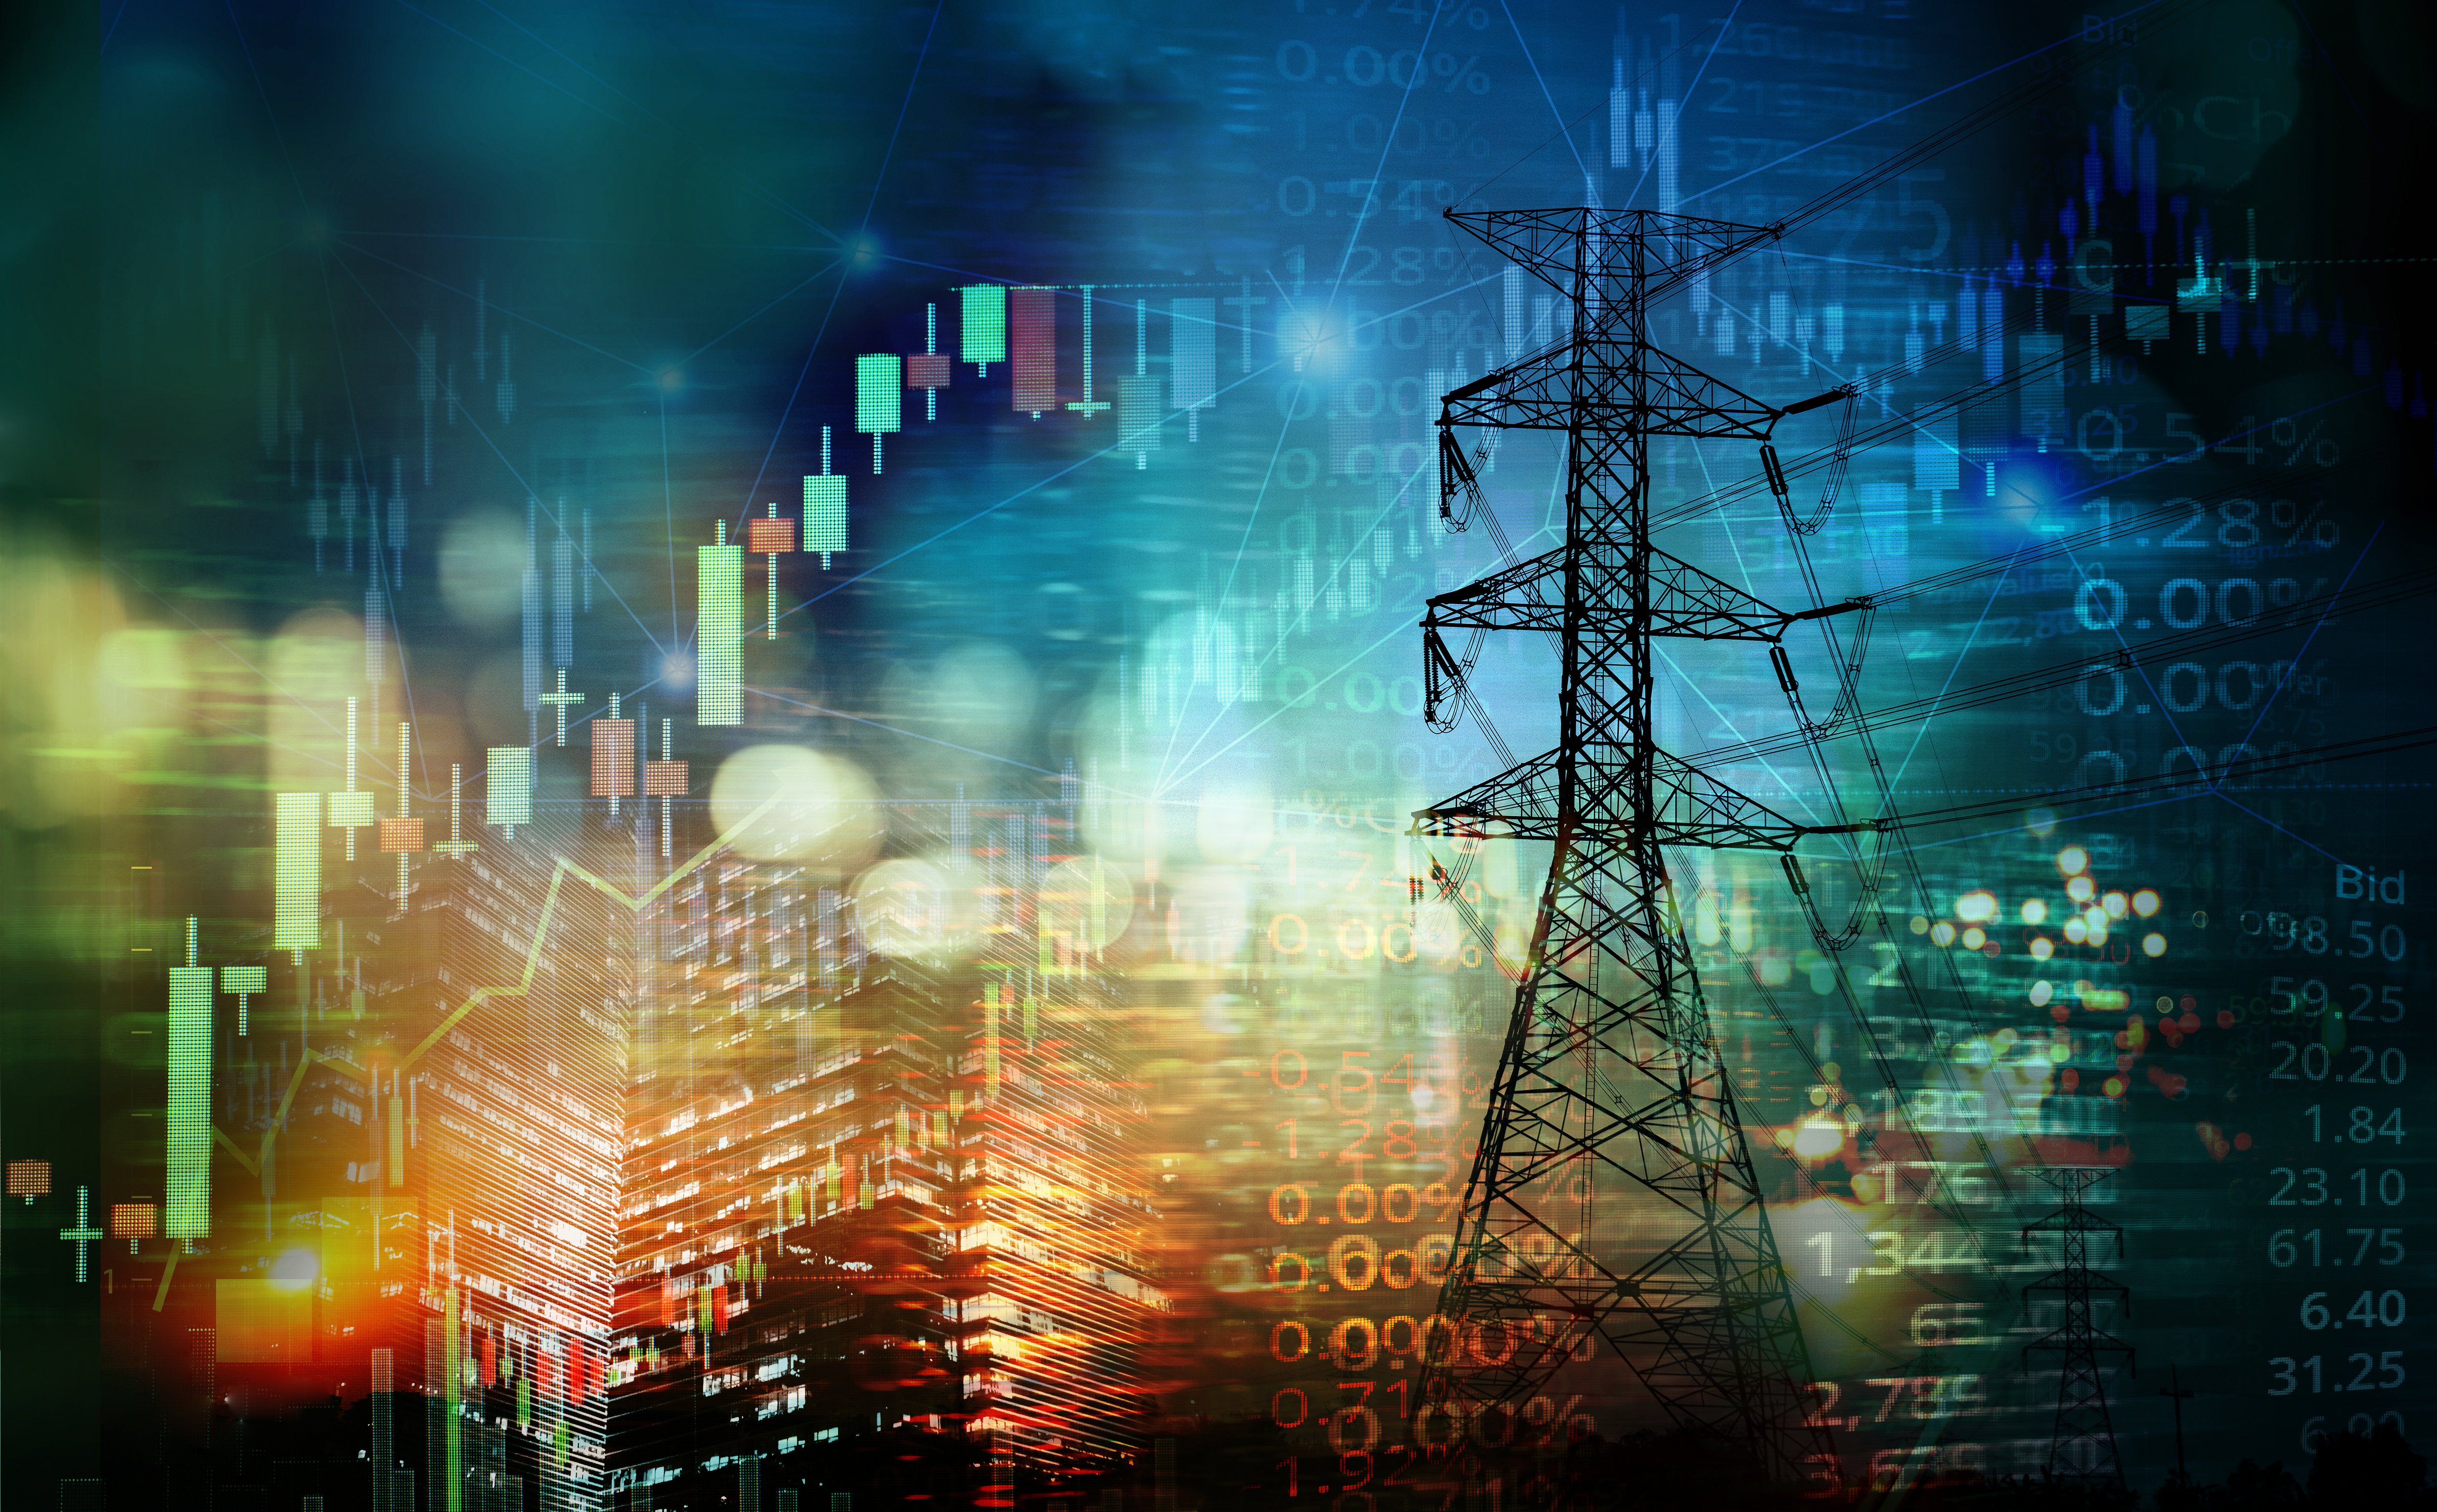 Importance of the Day Ahead market in power management